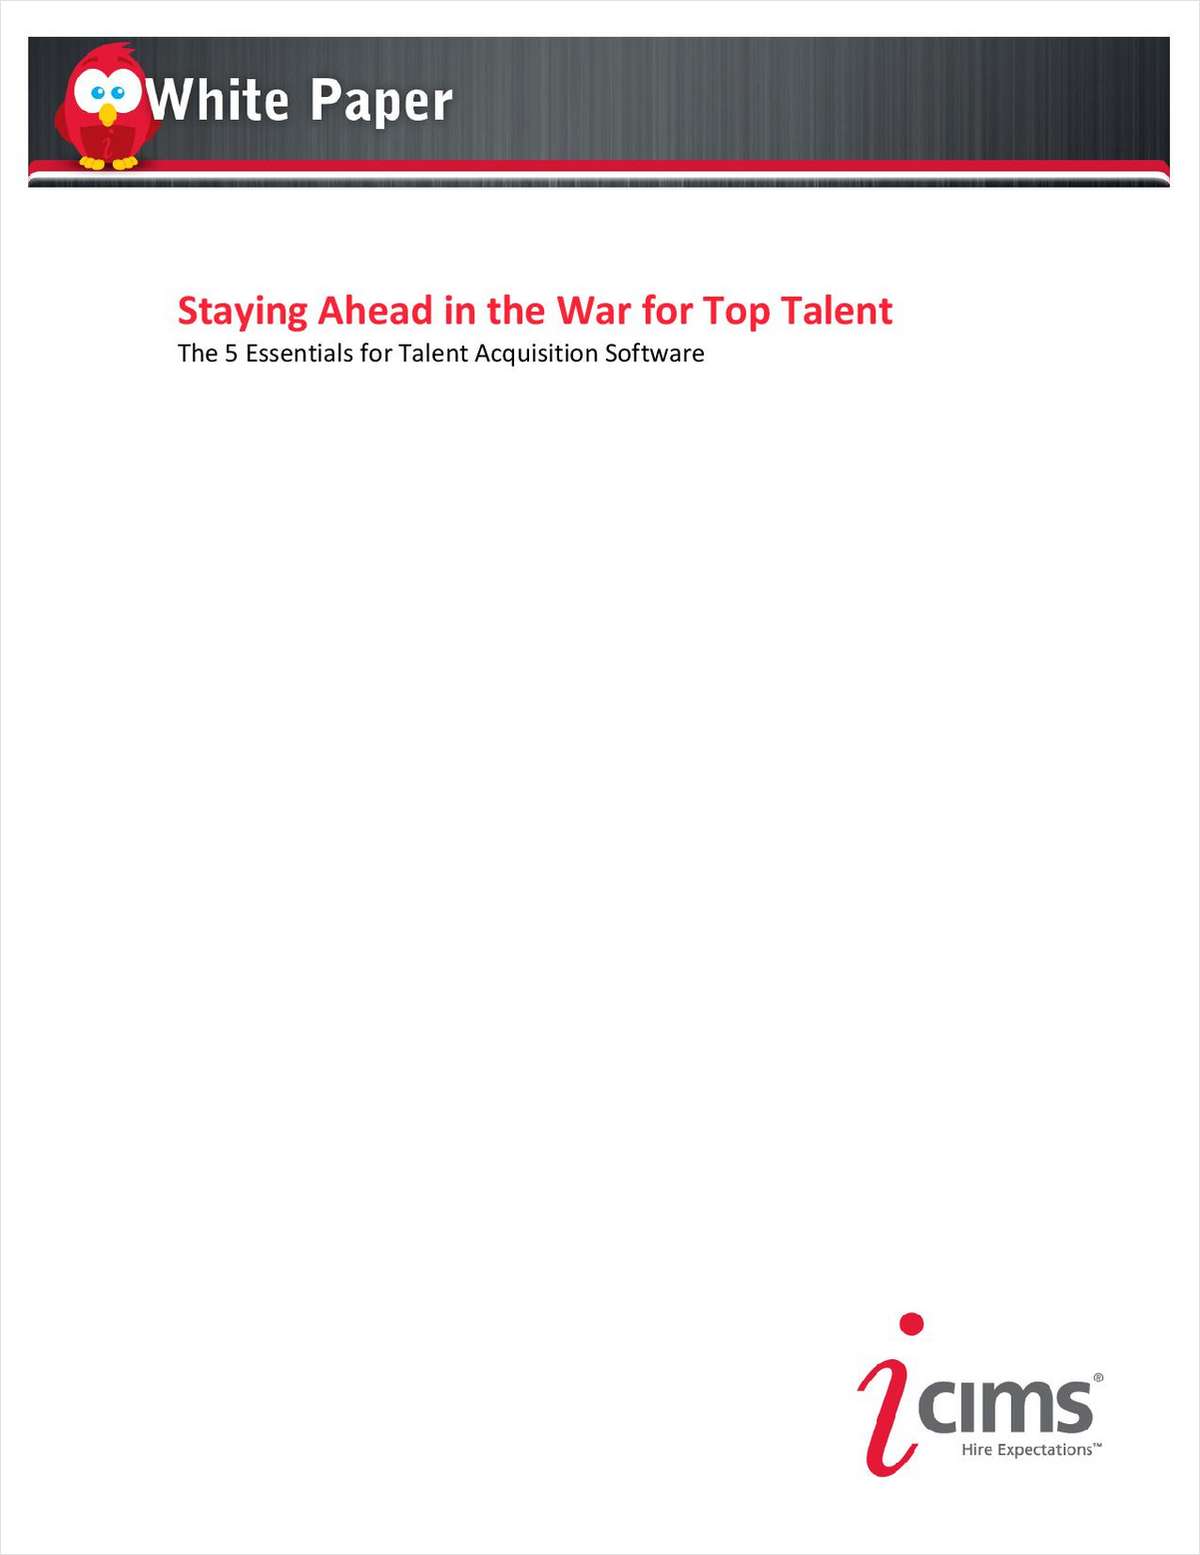 Staying Ahead in the War for Top Talent: The 5 Essentials for Talent Acquisition Software